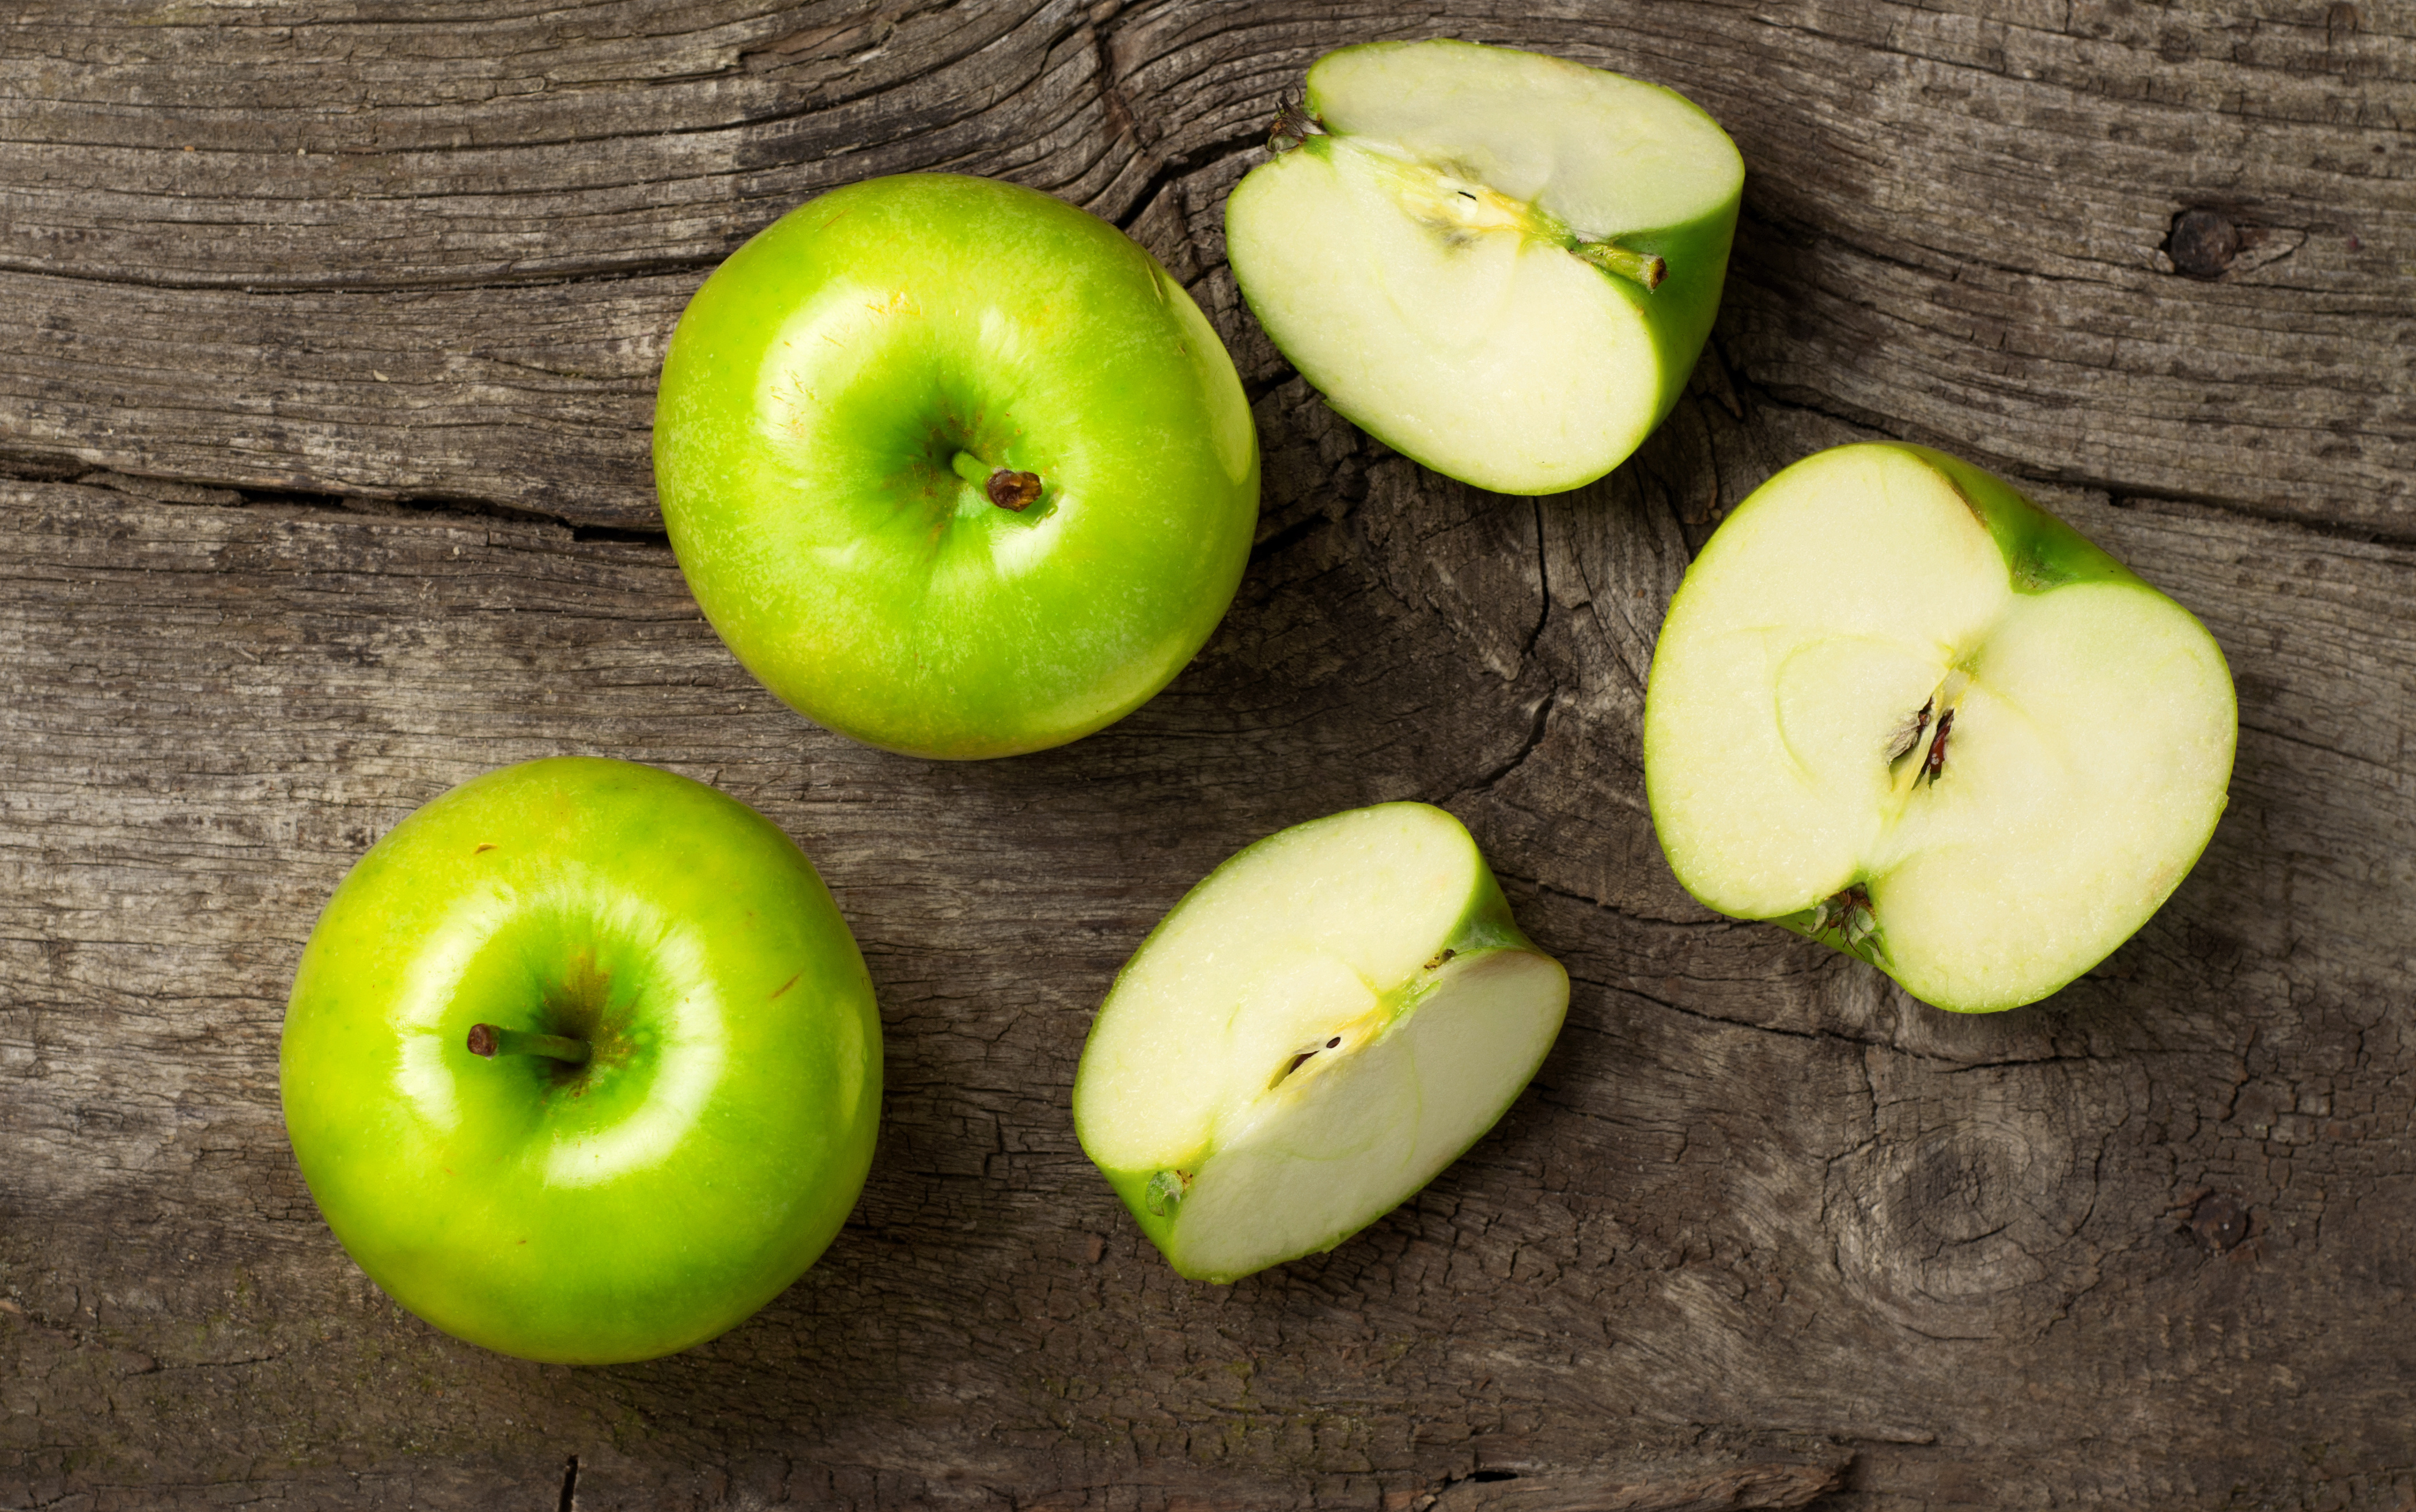 prevent apples from browning-apples-organic-kitchen tips